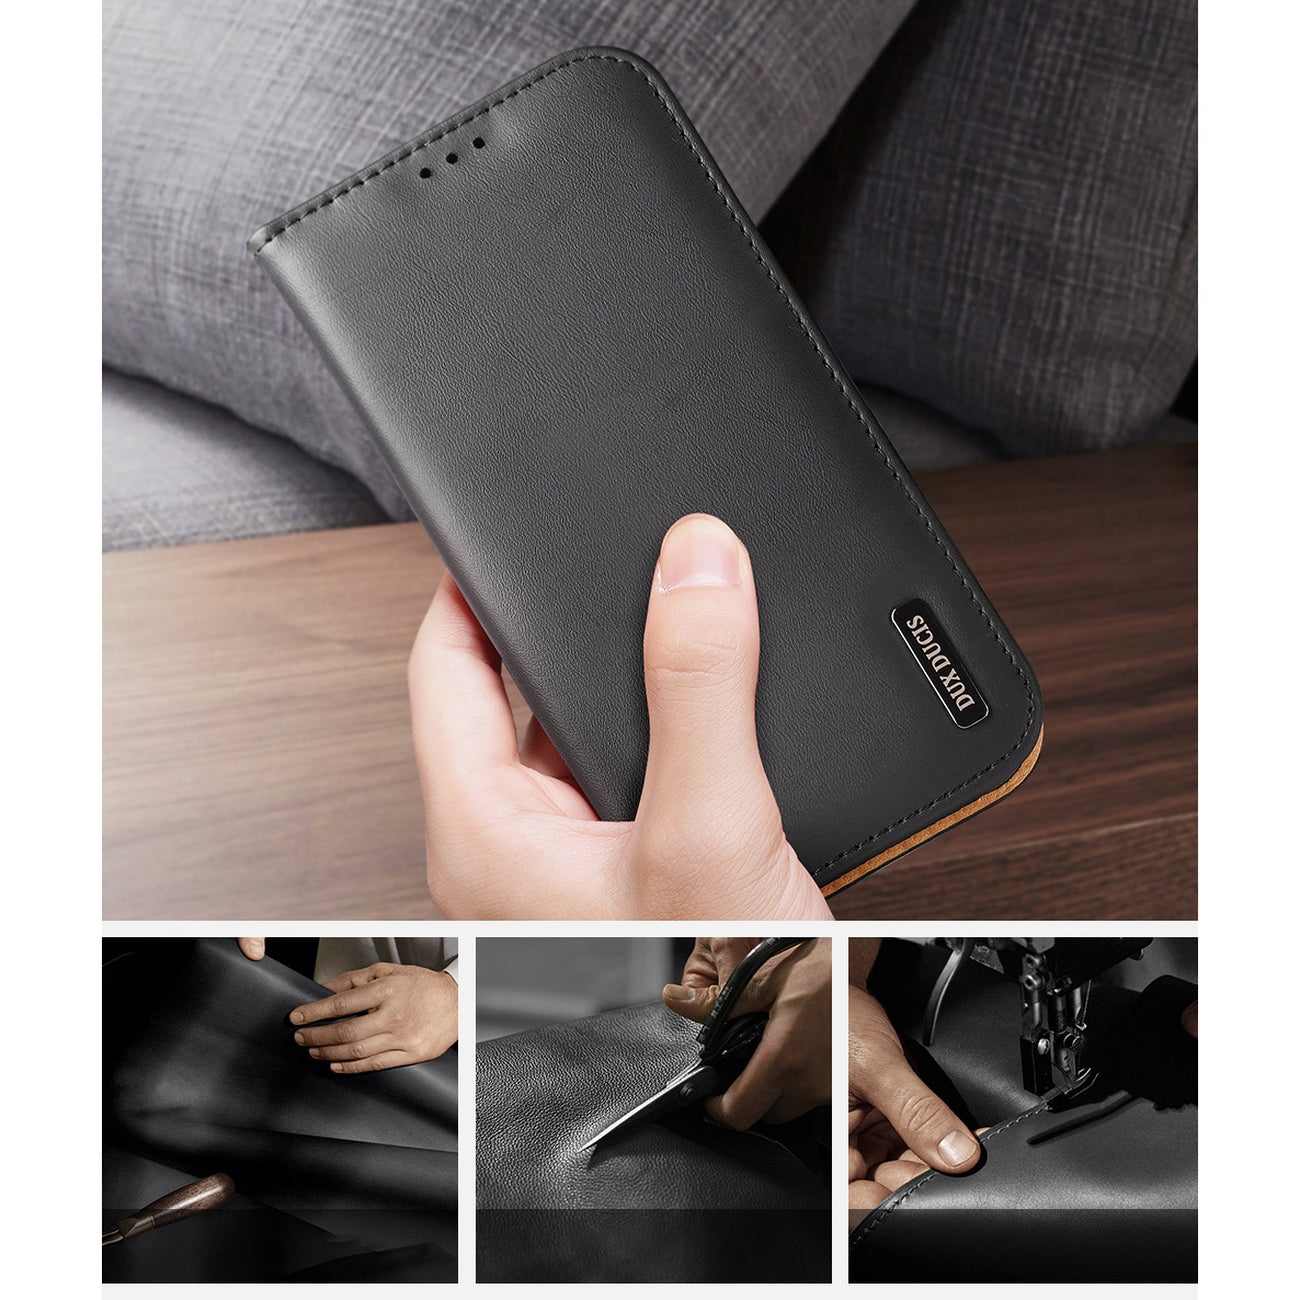 [RETURNED ITEM] Dux Ducis Hivo Leather Flip Cover Genuine Leather Wallet for Cards and Documents iPhone 14 Brown